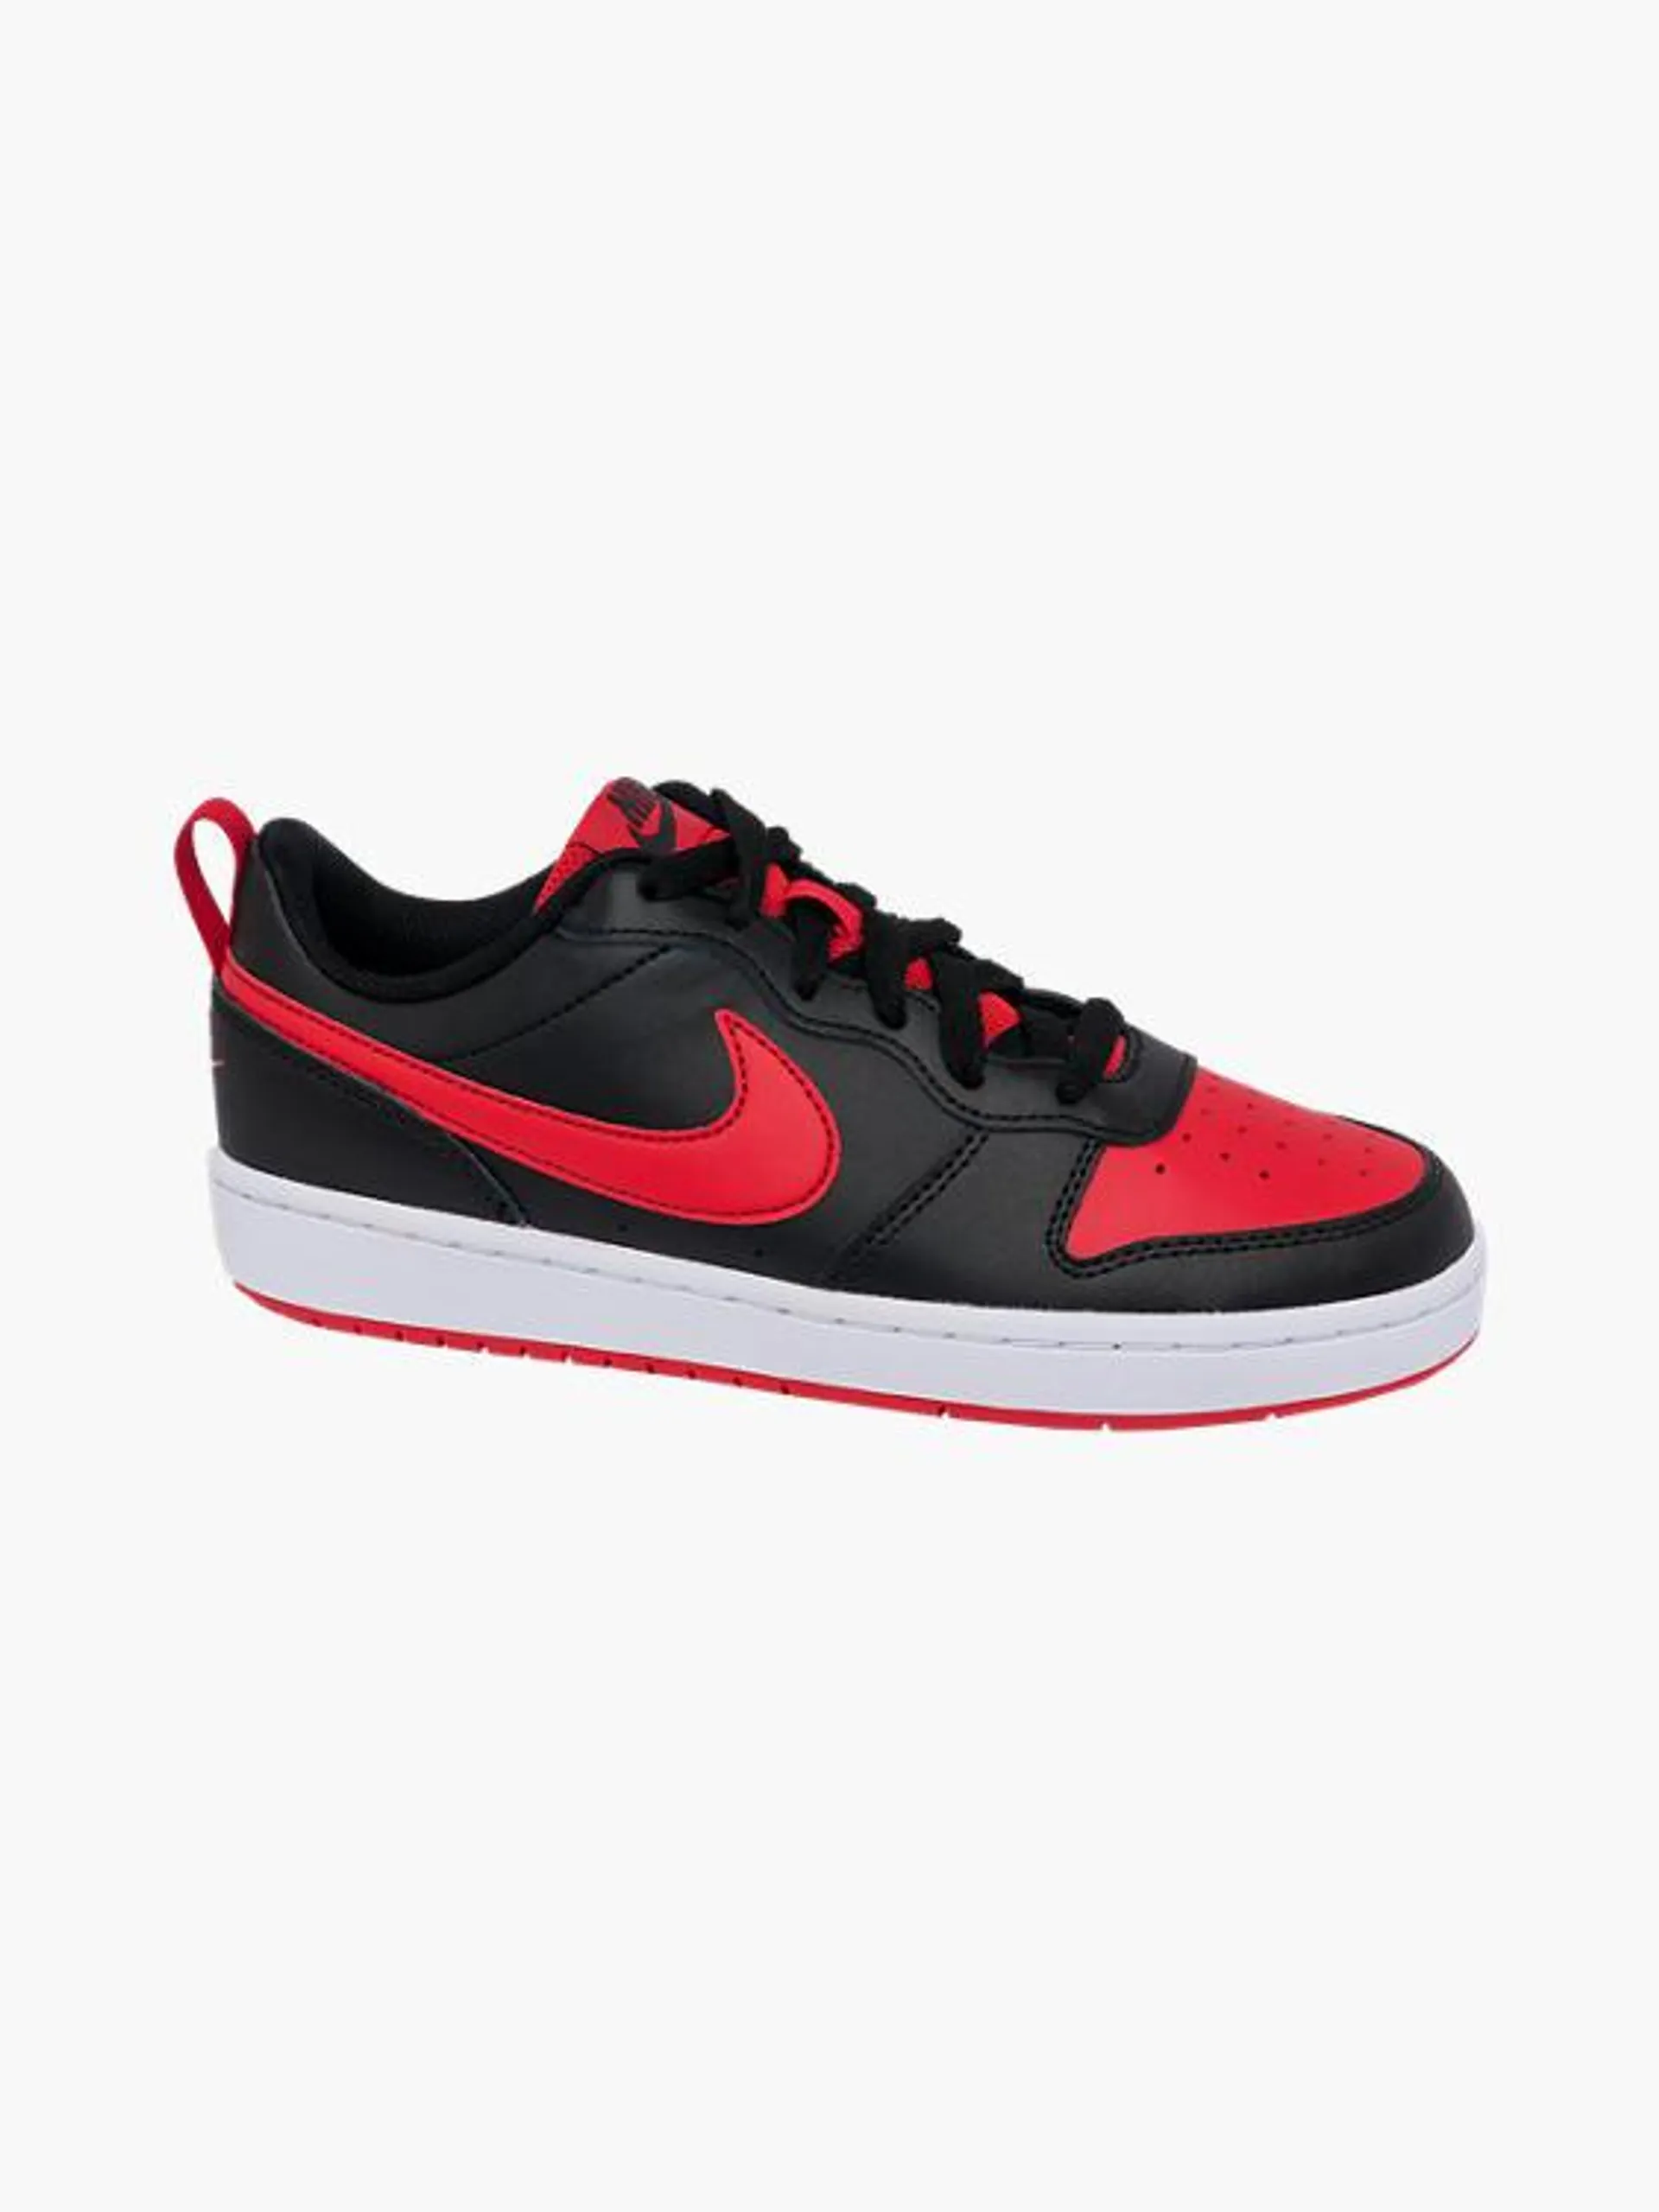 Boys Nike Court Borough Low Black and Red